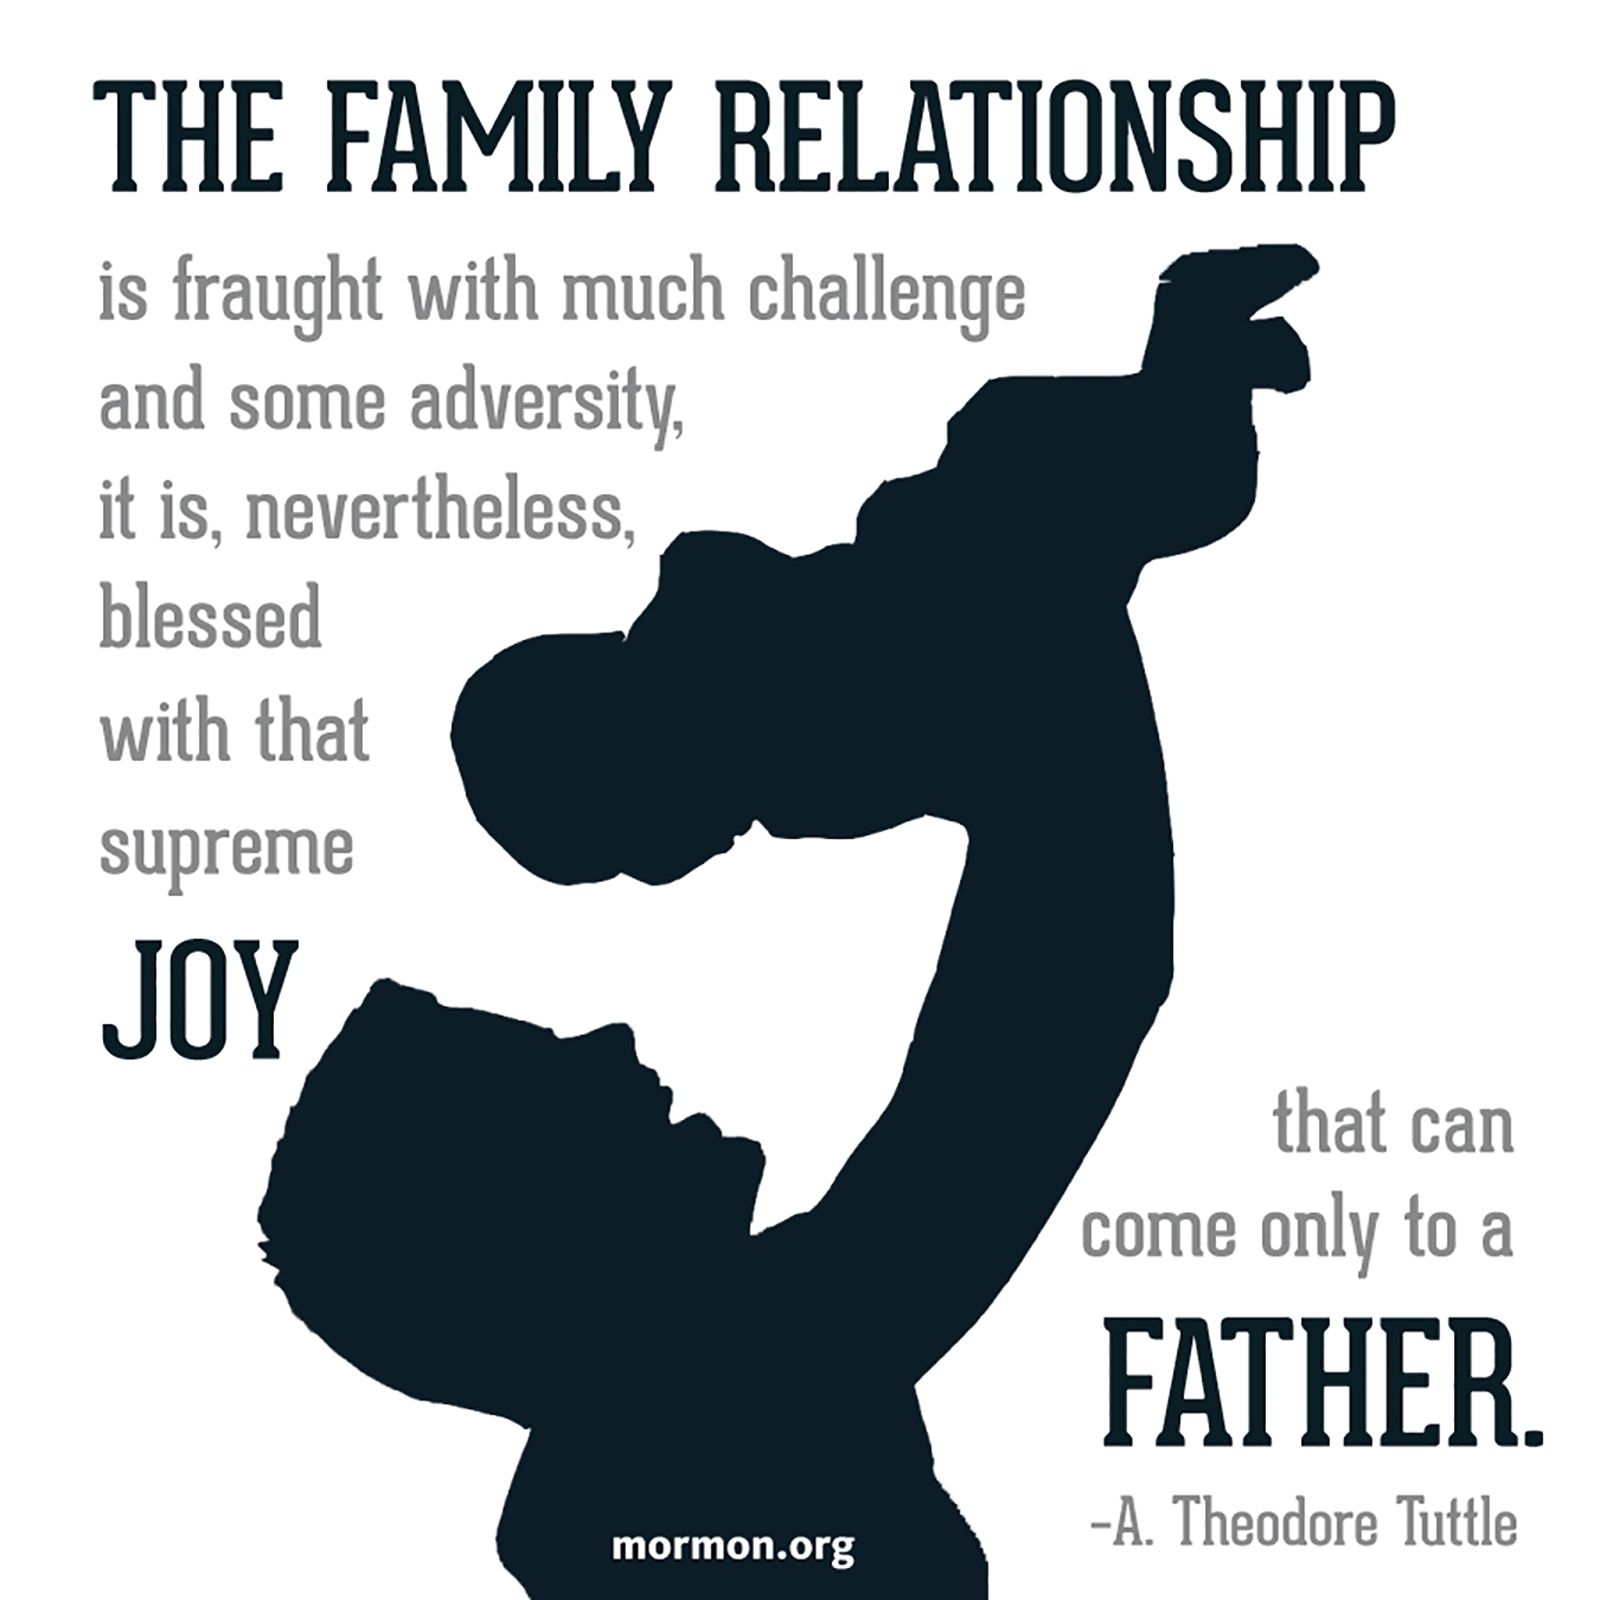 “The family relationship is fraught with much challenge and some adversity, it is, nevertheless, blessed with that supreme joy that can come only to a father.”—Elder A. Theodore Tuttle, “The Role of Fathers”